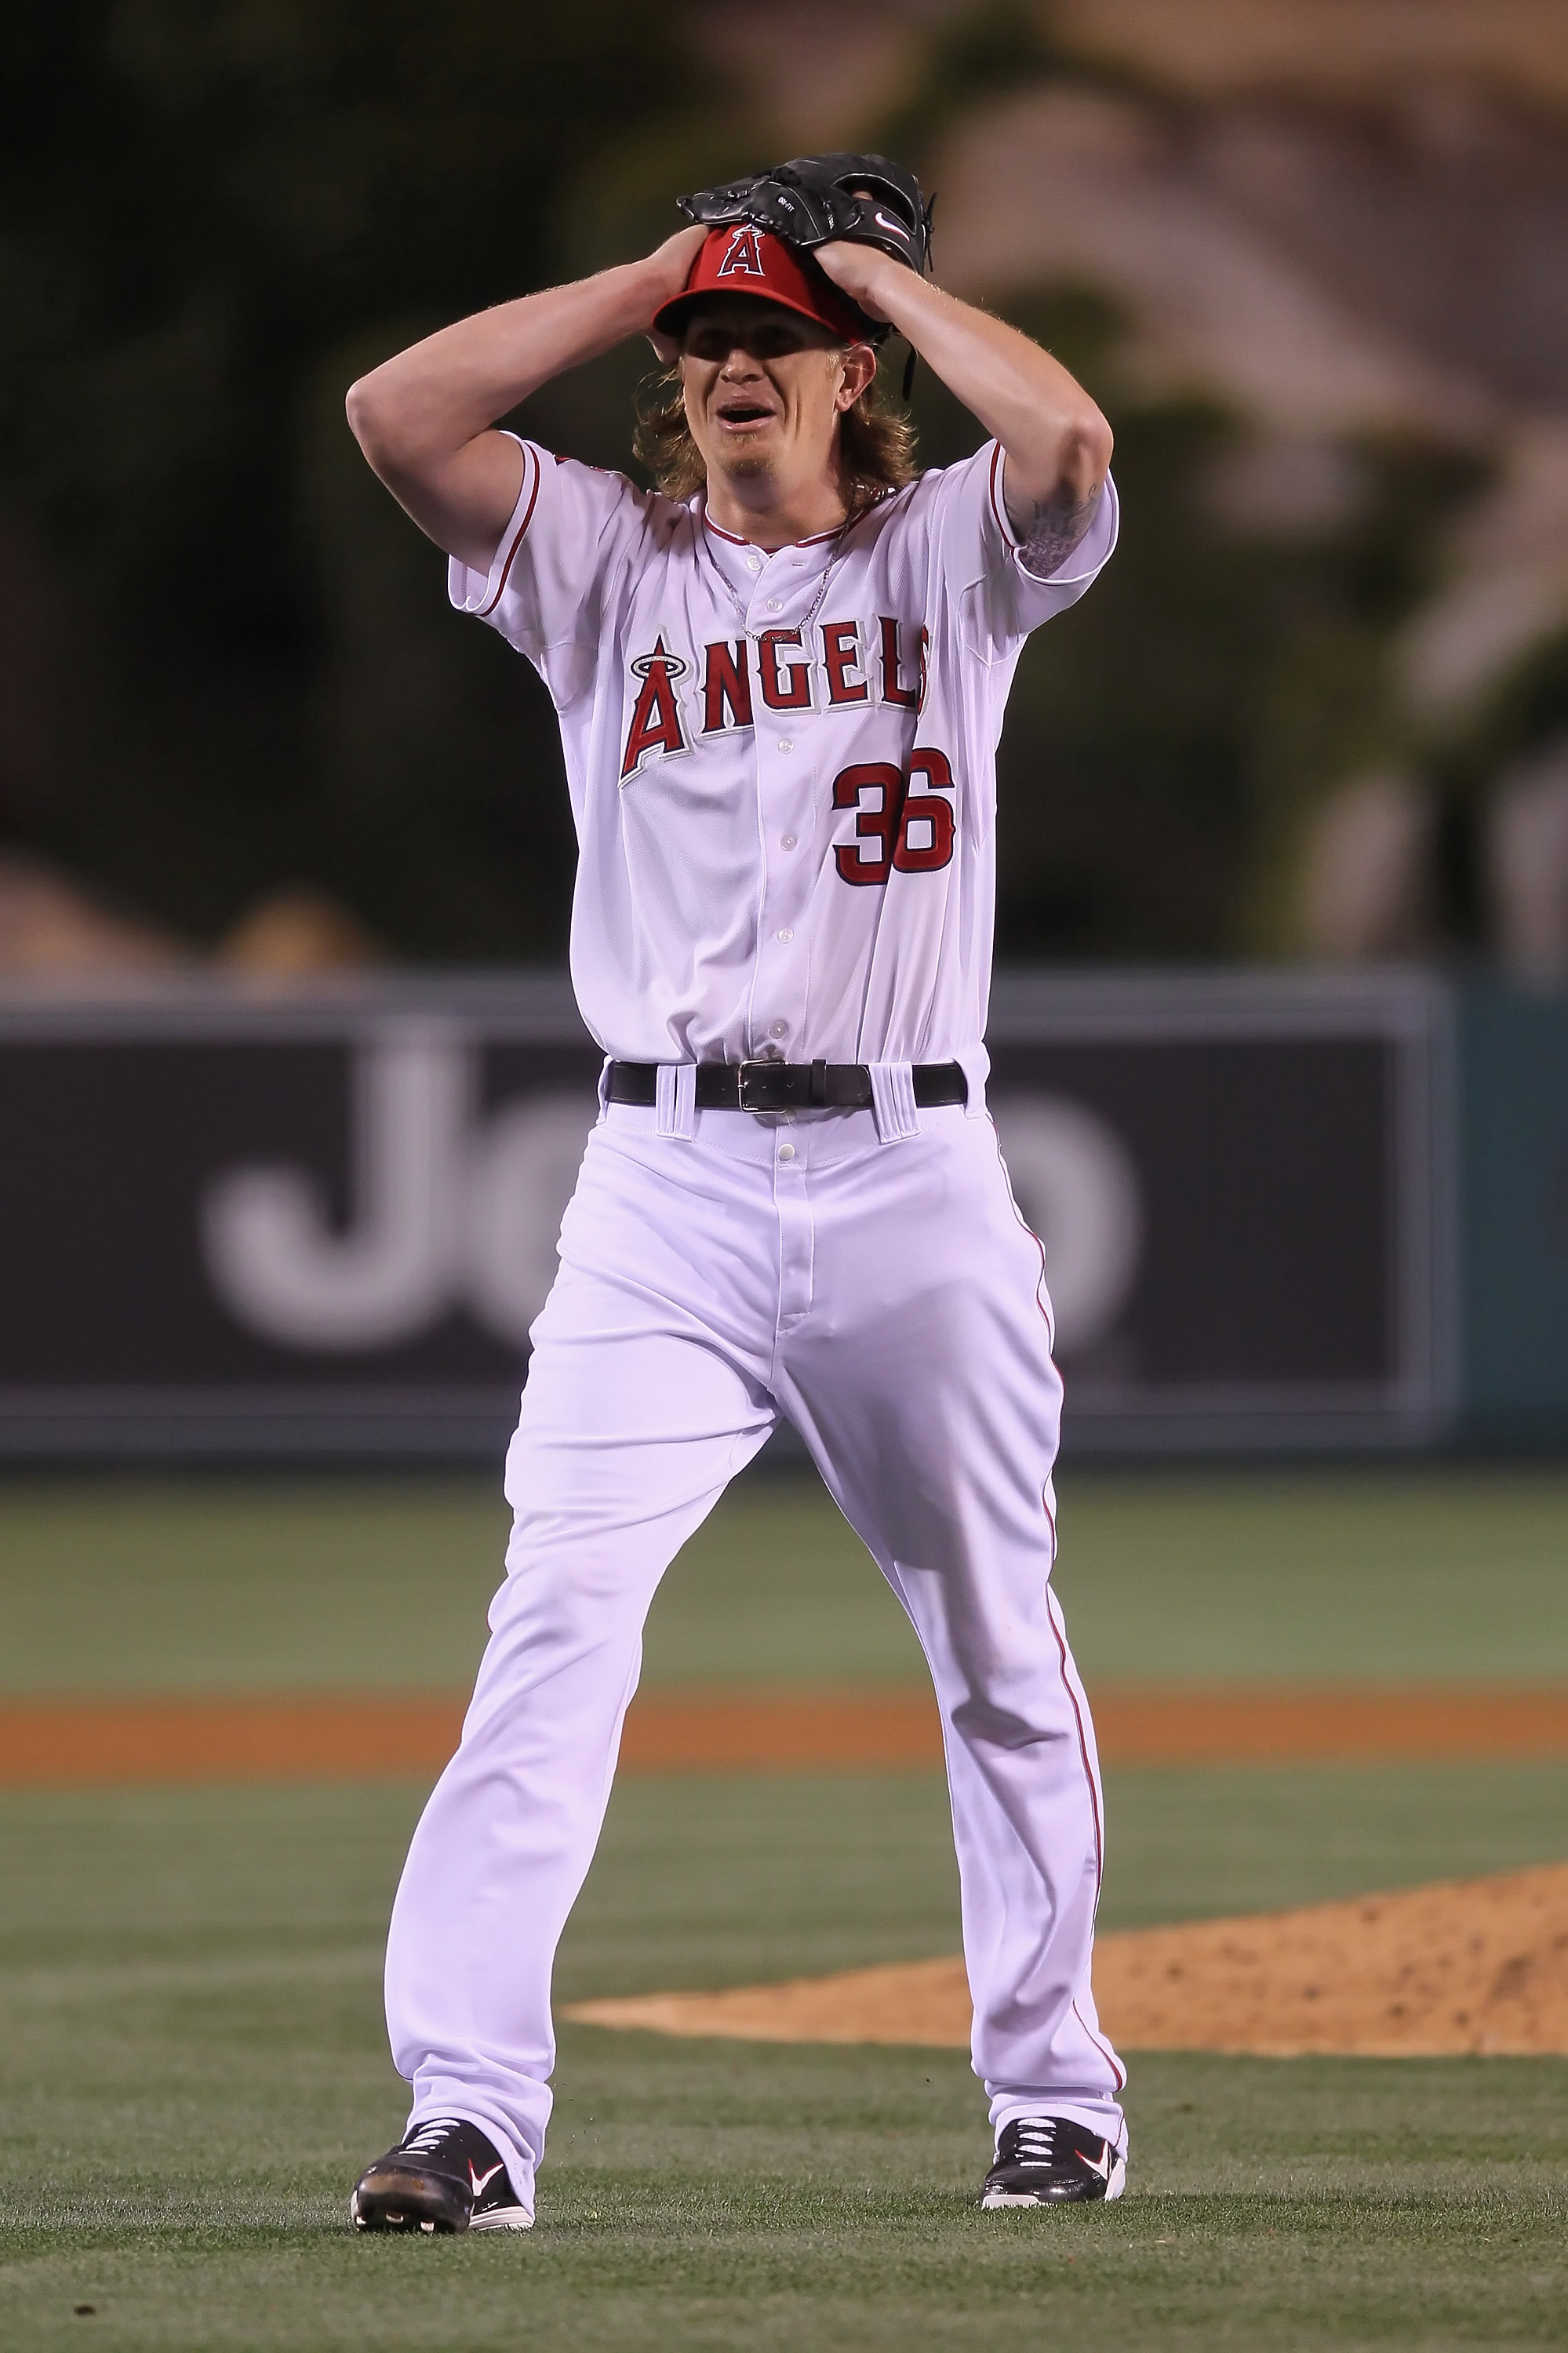 Starting pitcher Jered Weaver of the Los Angeles Angels of Anaheim celebrates after throwing a no-hitter against the Minnesota Twins at Angel Stadium of Anaheim on May 2, 2012 in Anaheim, Ca.